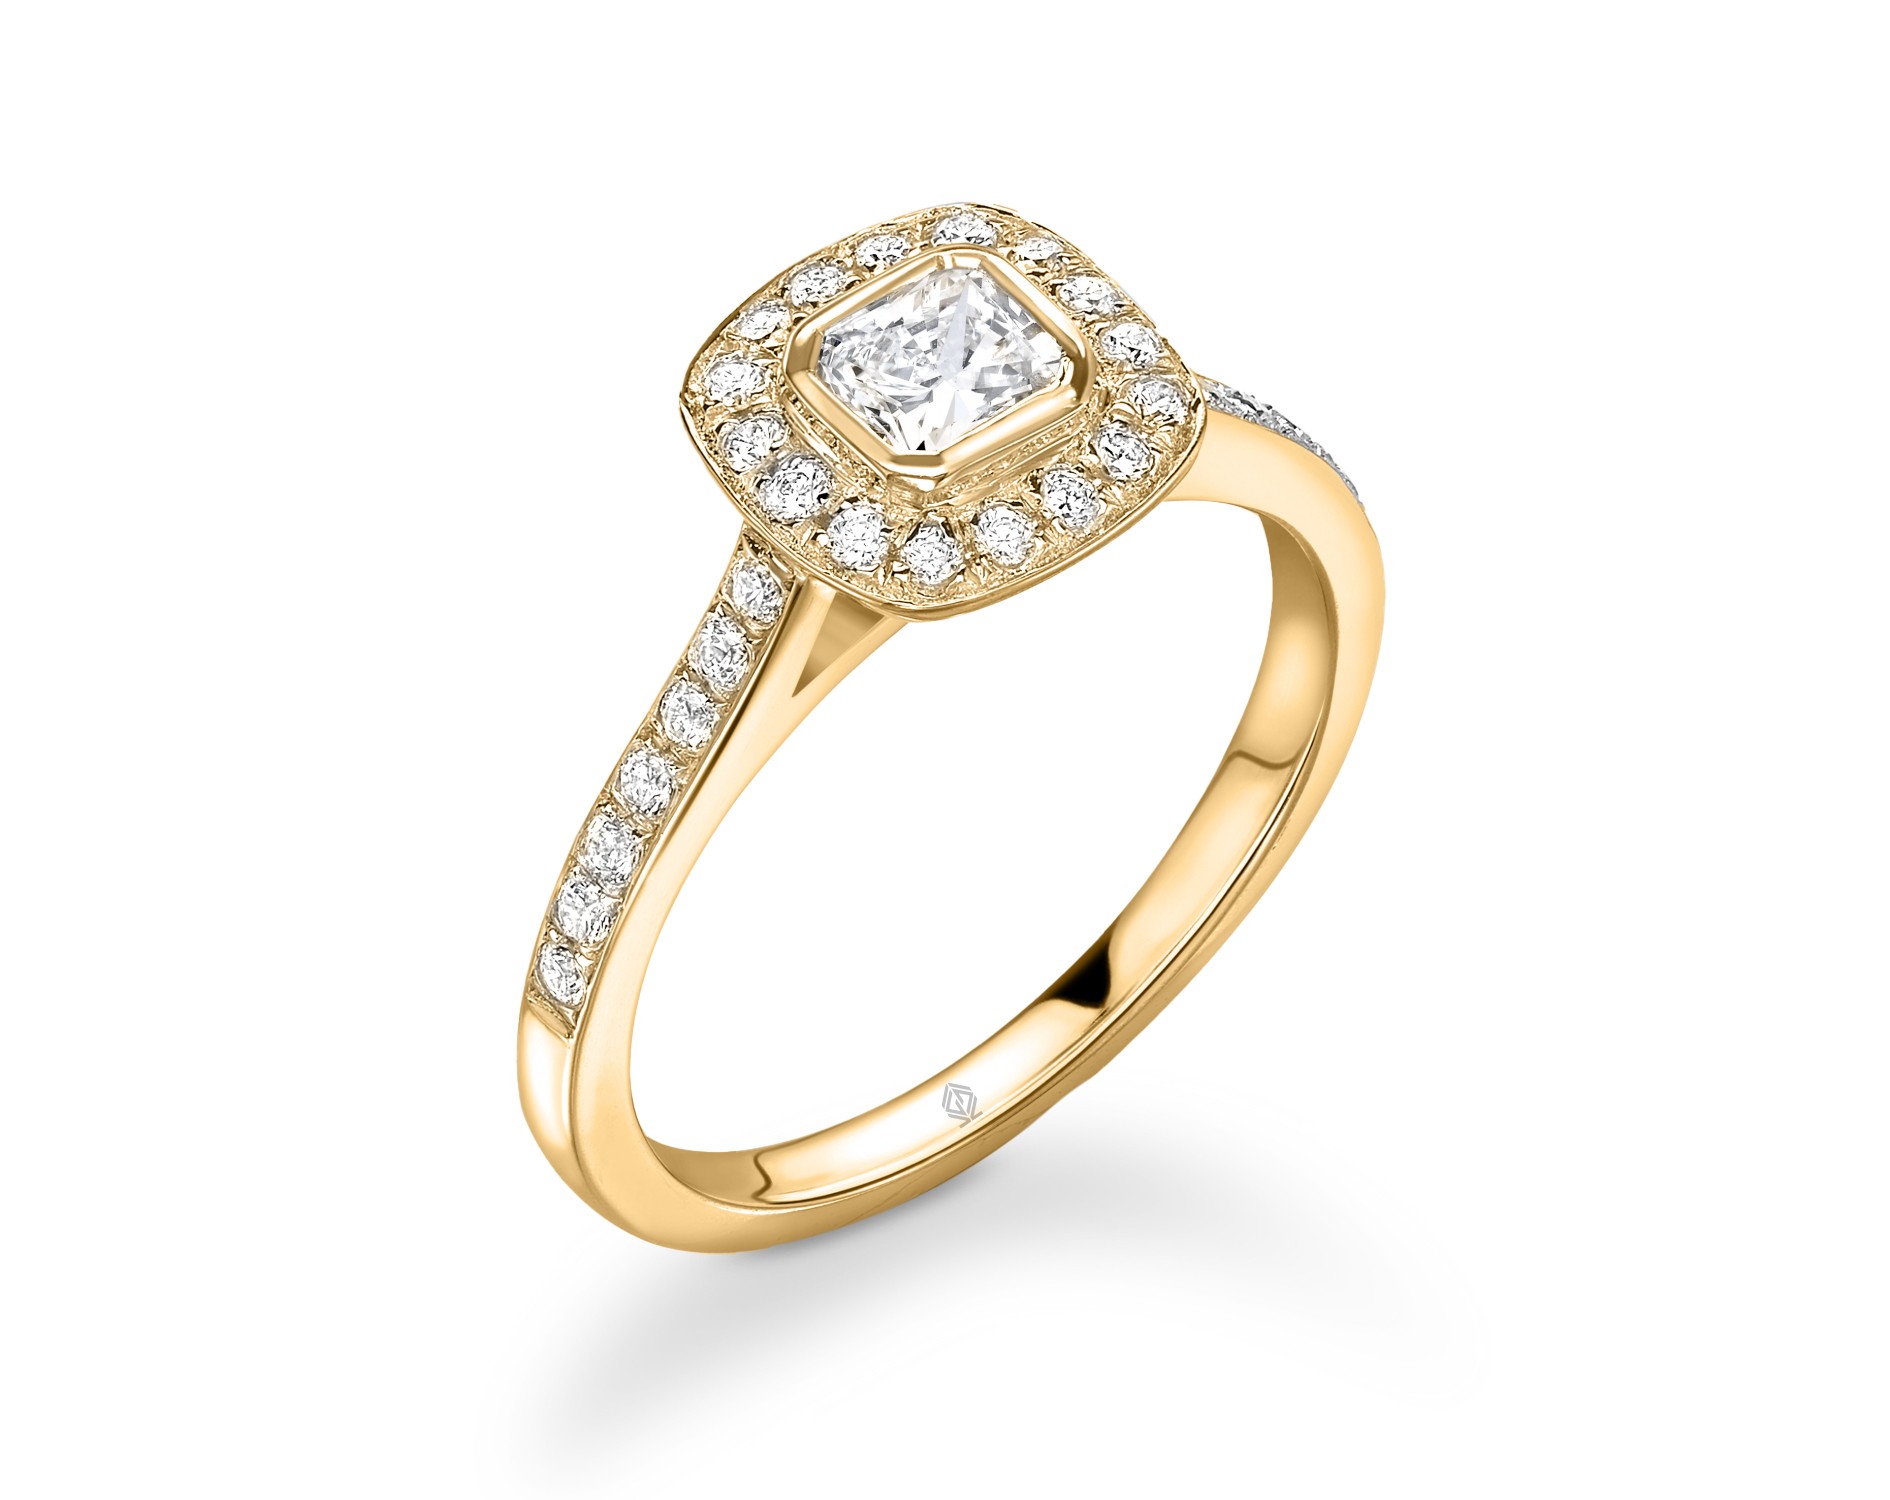 18K YELLOW GOLD CUSHION CUT HALO DIAMOND ENGAGEMENT RING WITH SIDE STONES CHANNEL SET